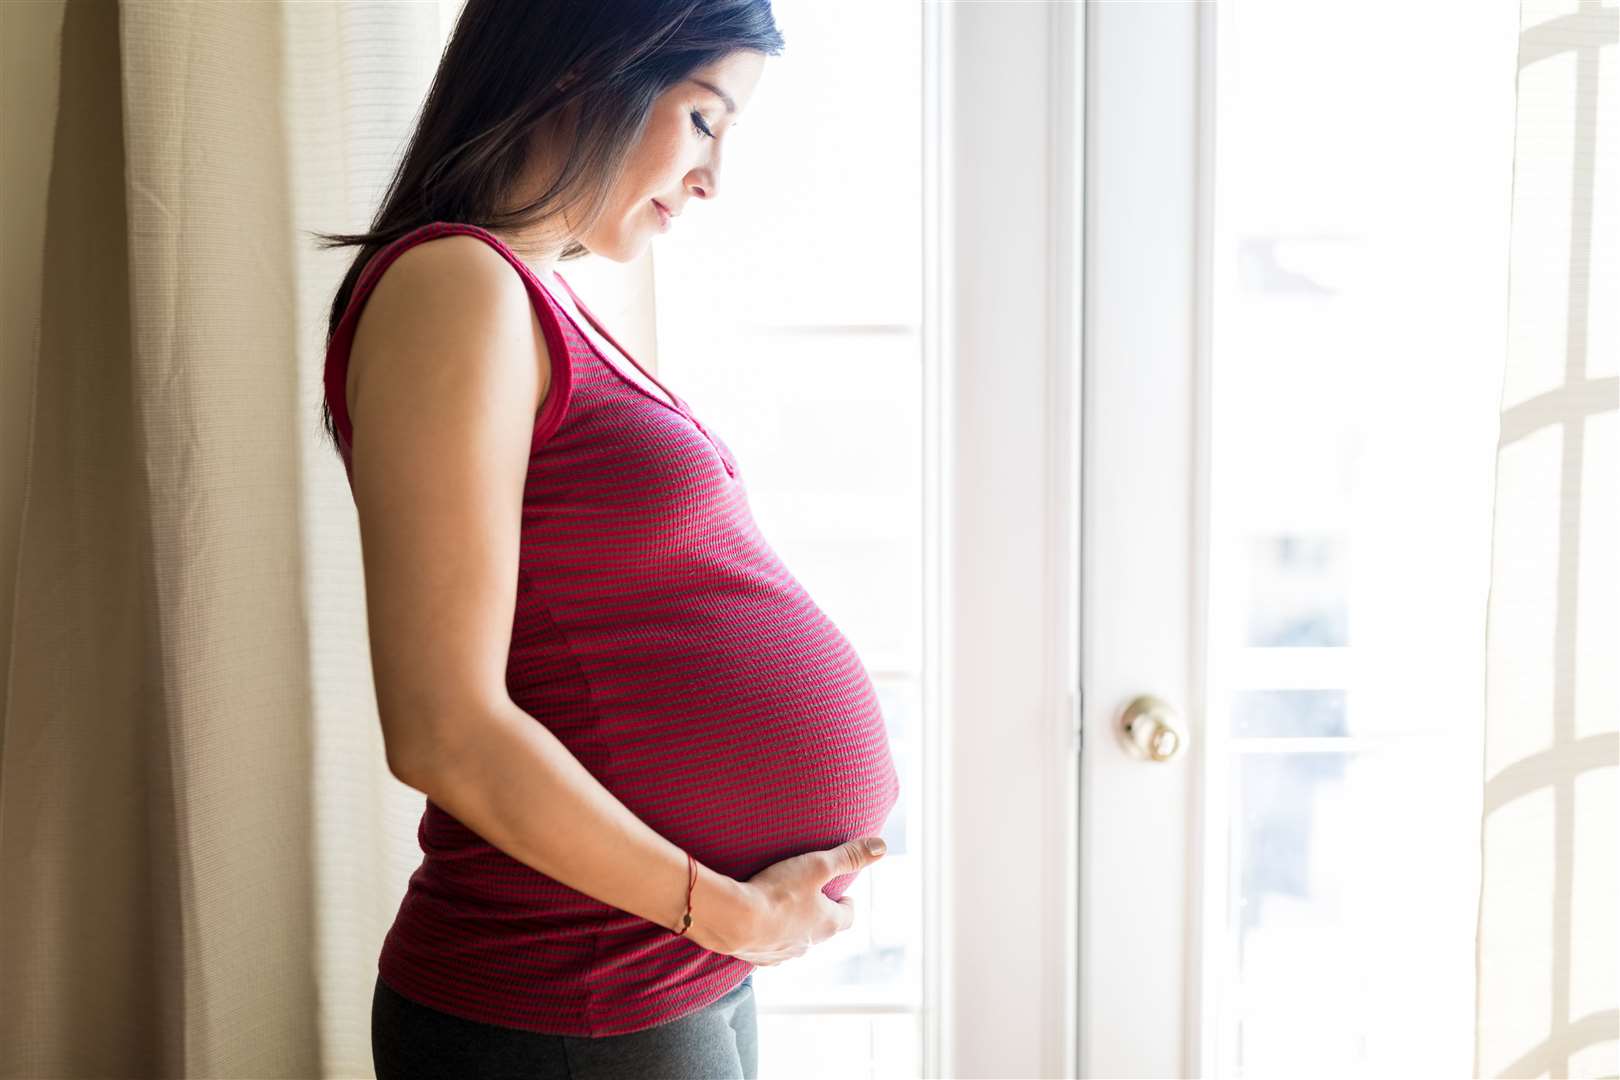 The medicines regulator says the Covid-19 jab remains safe for pregnant women and its advice hasn't changed. Image: iStock.